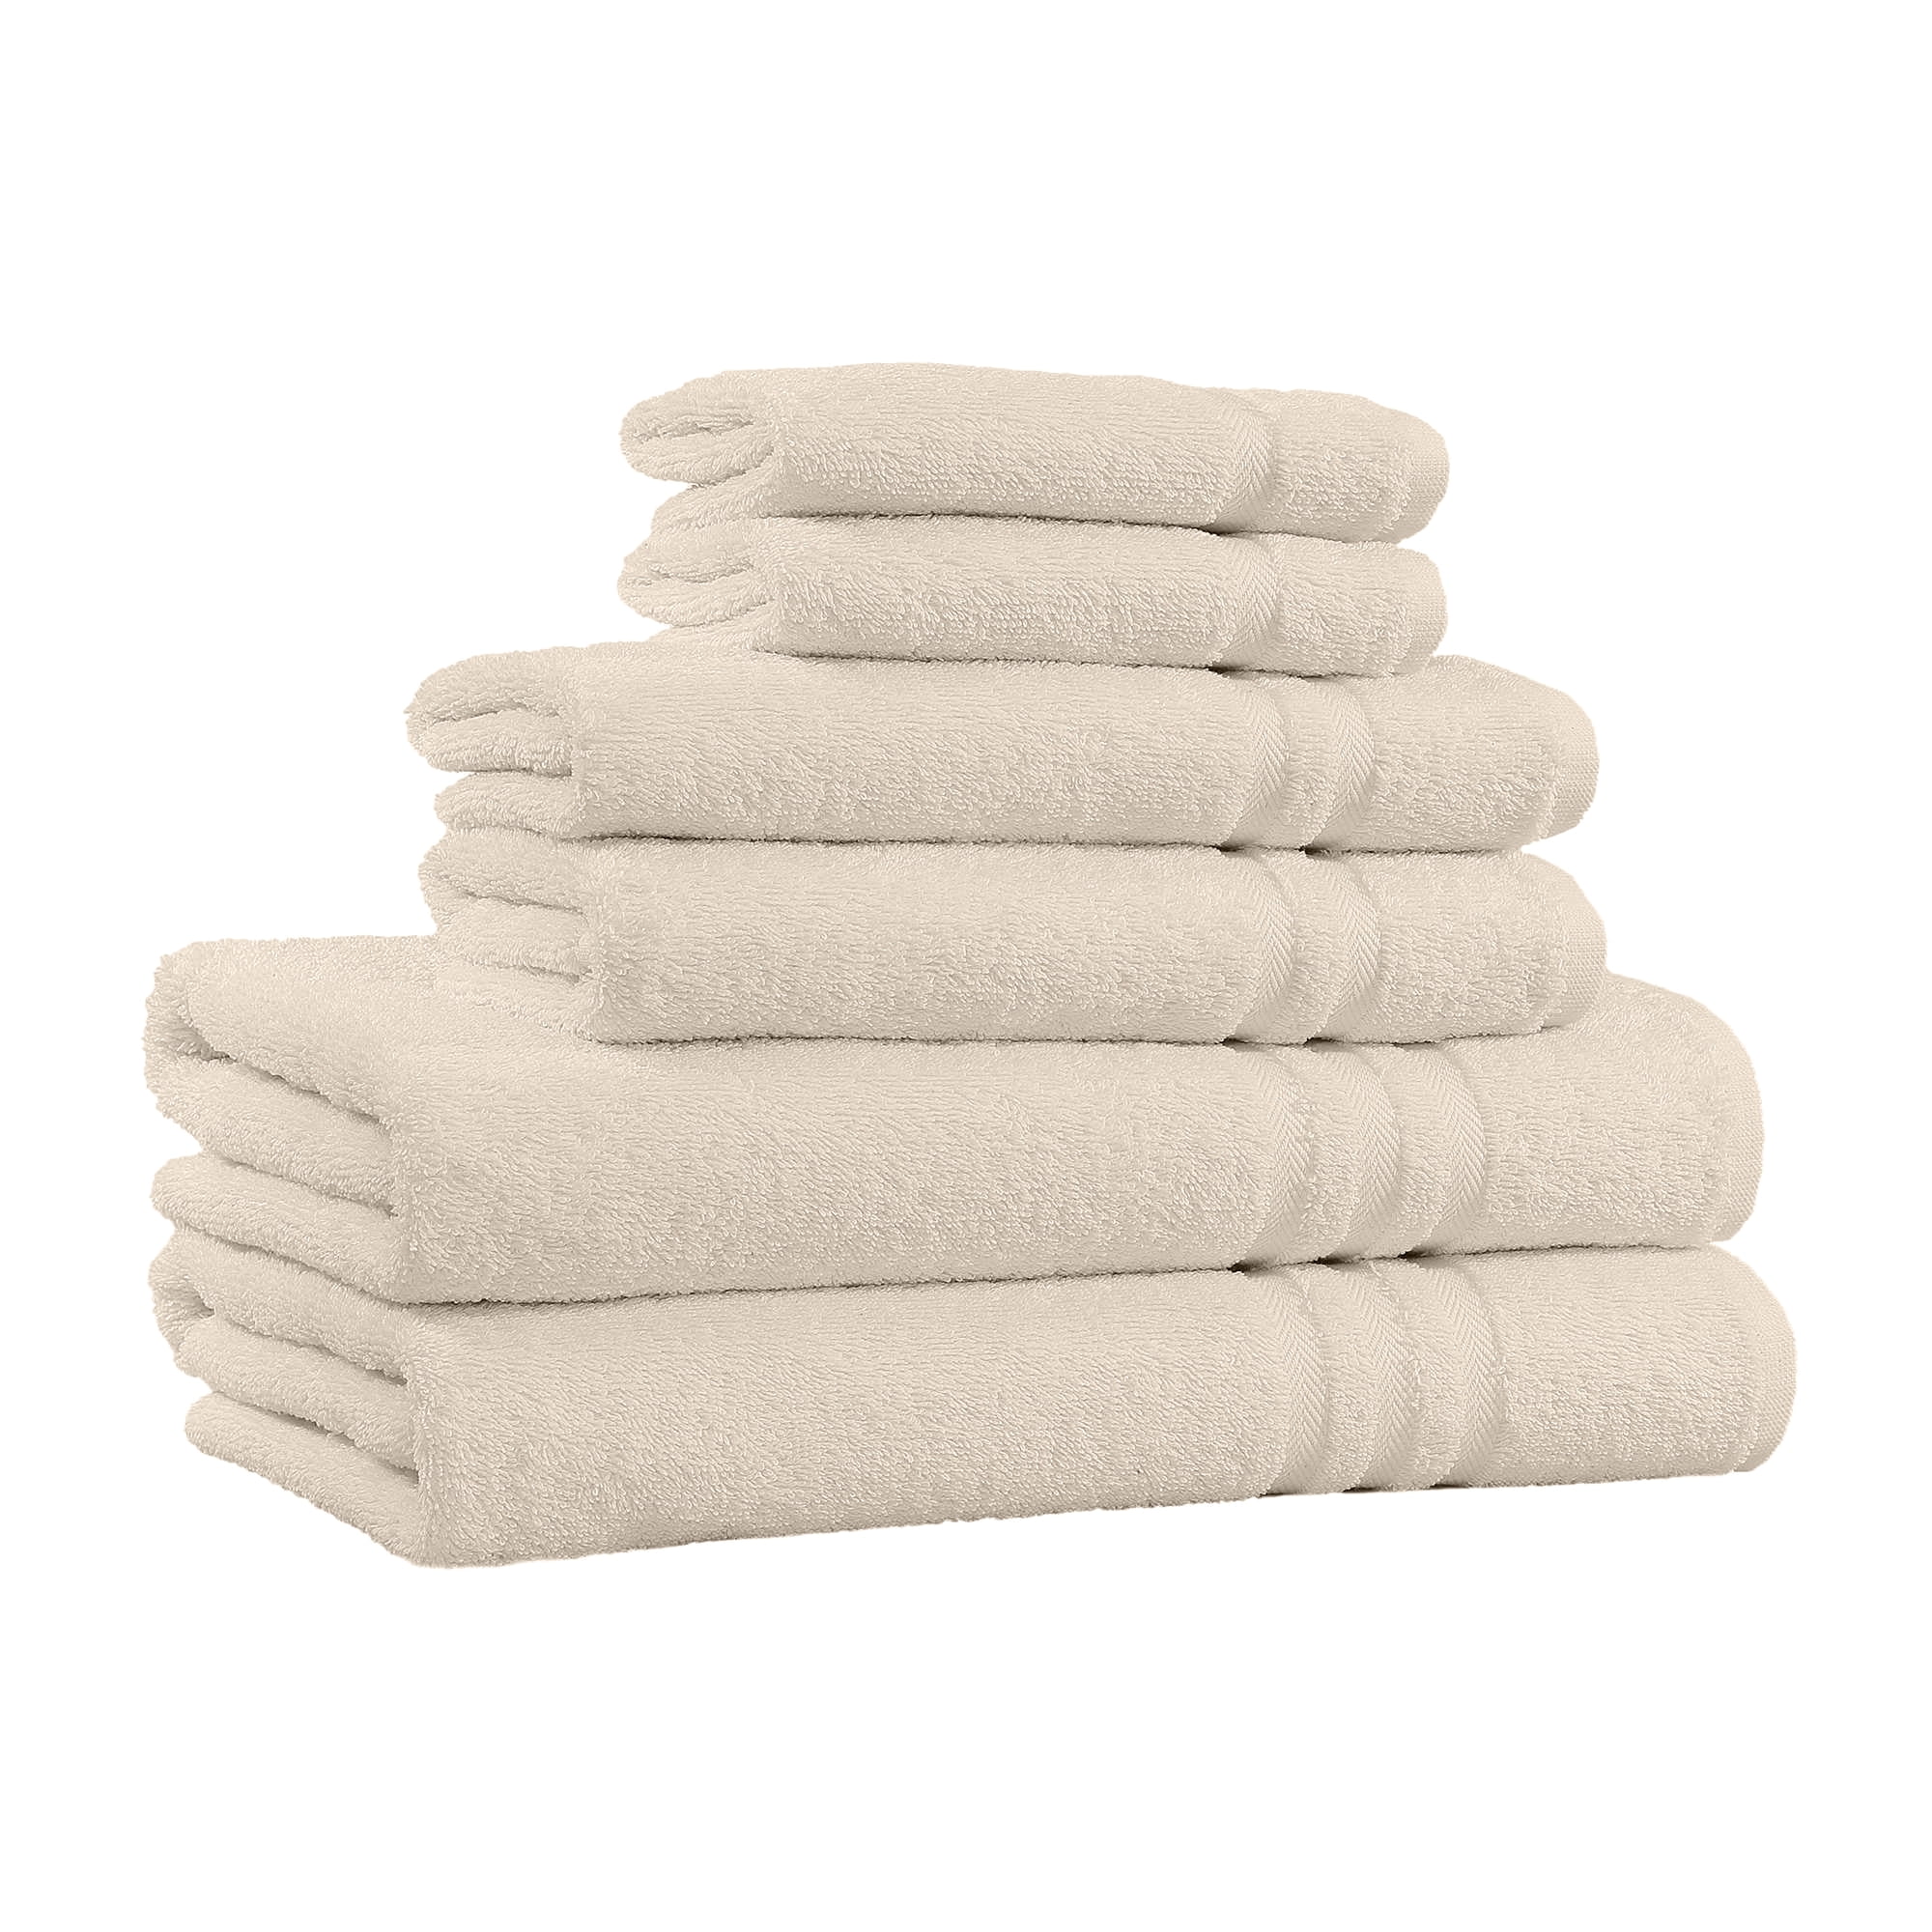 Luxury 100% Cotton 6-Piece Towel Set, 650 GSM Hotel Collection, Super Soft  and Highly Absorbent (Multicolor, 6 Pack Set)